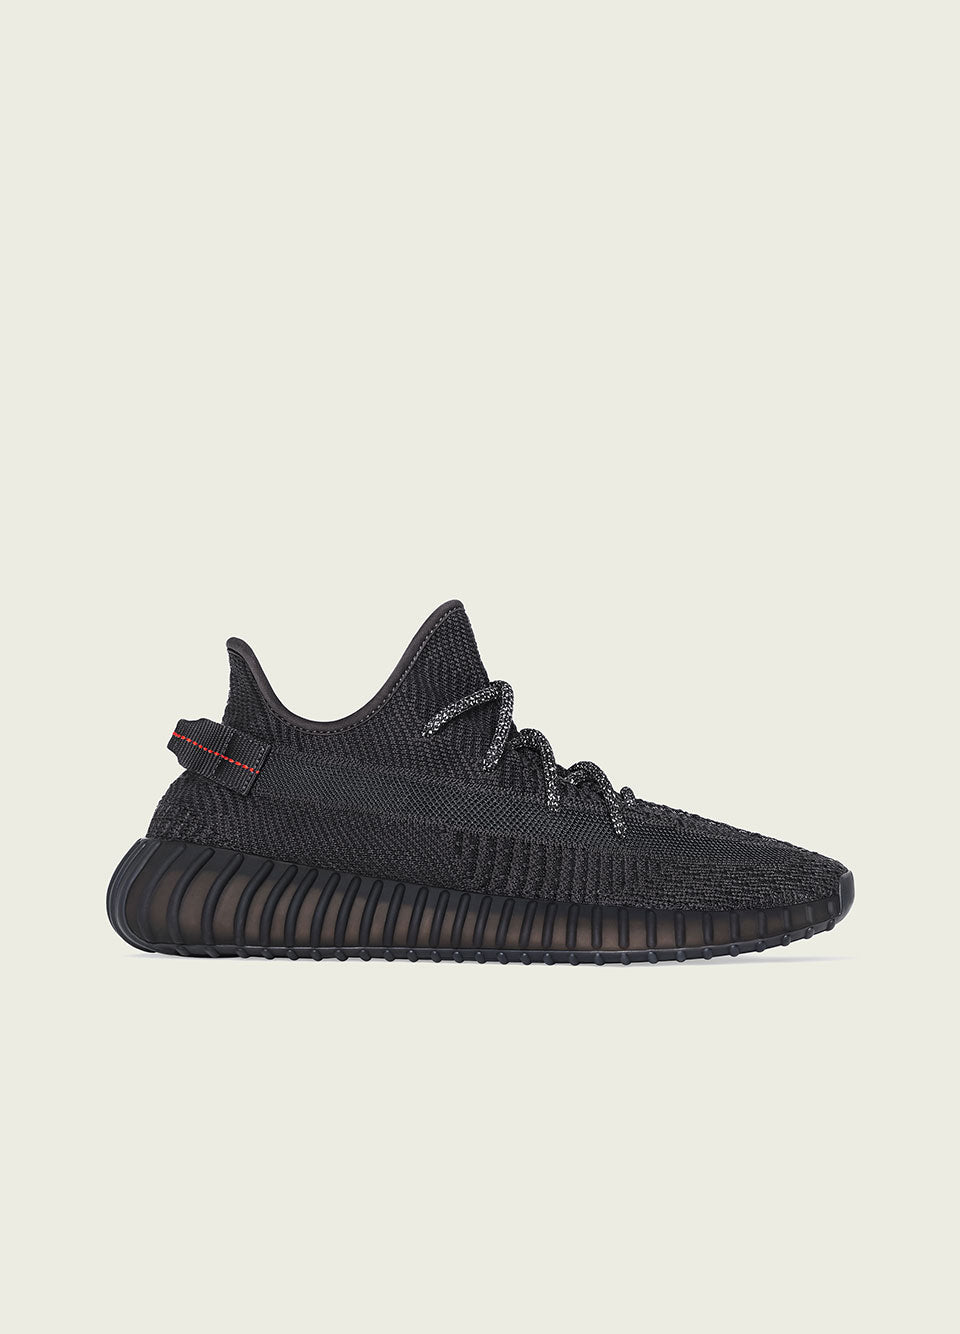 adidas Yeezy Boost 350 V2 Black --launch-date--2019-11-28